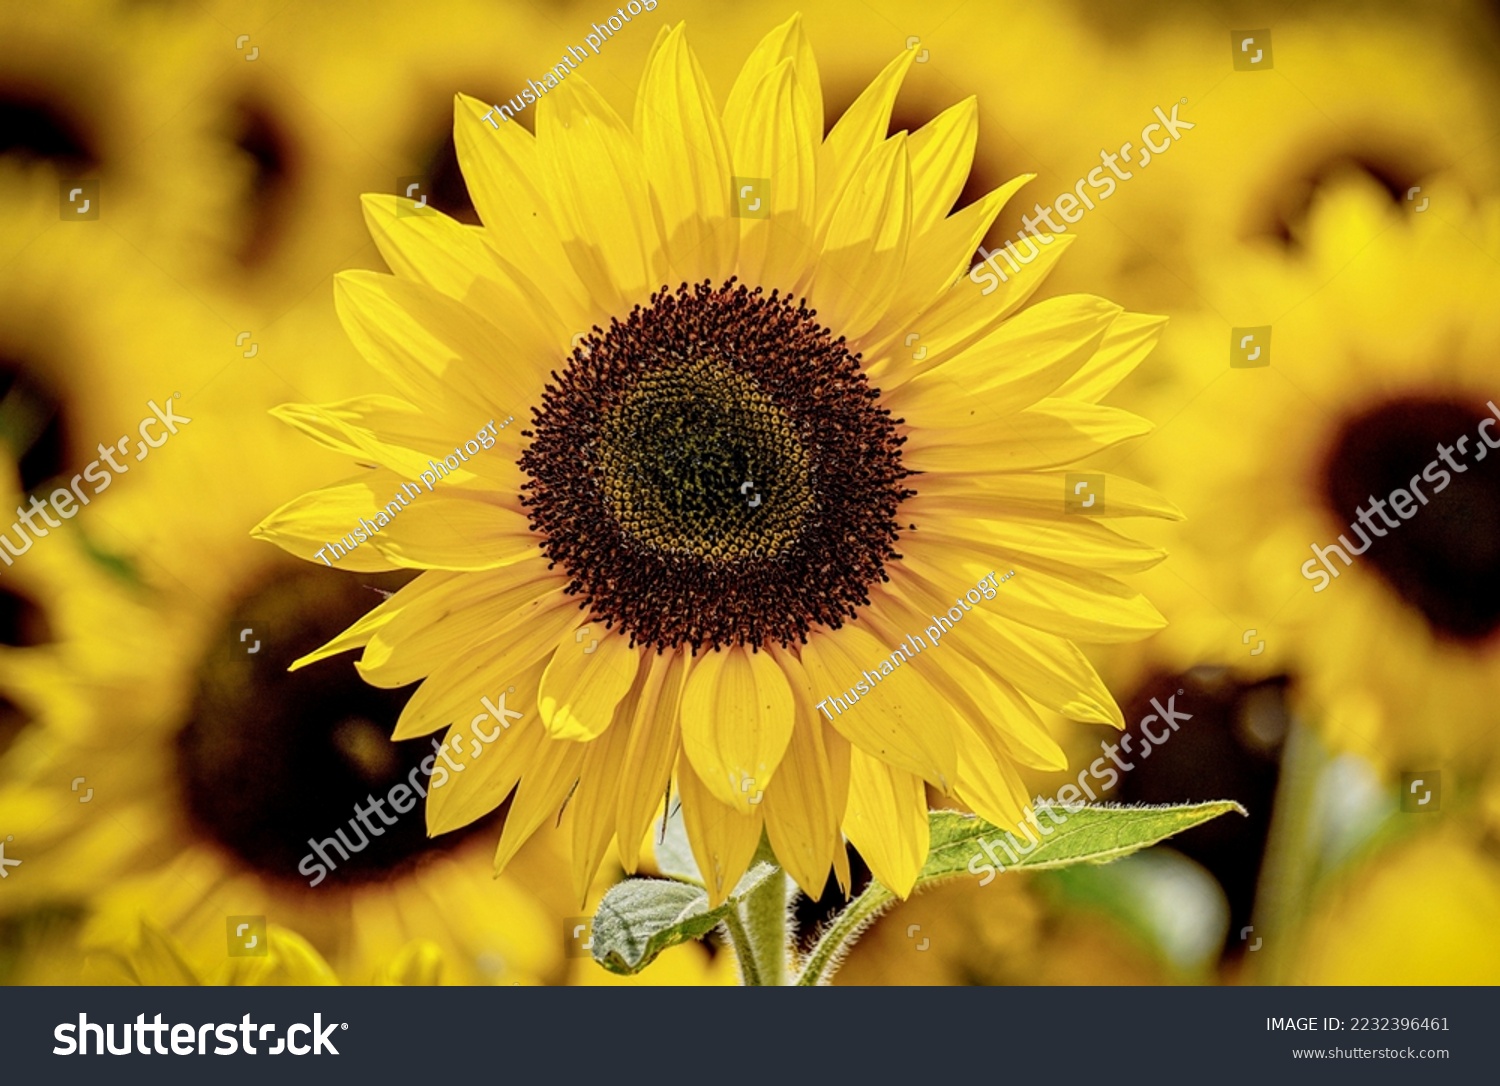 Sunflower natural background, Sunflower blooming, Sunflower oil improves skin health and promote cell regeneration #2232396461